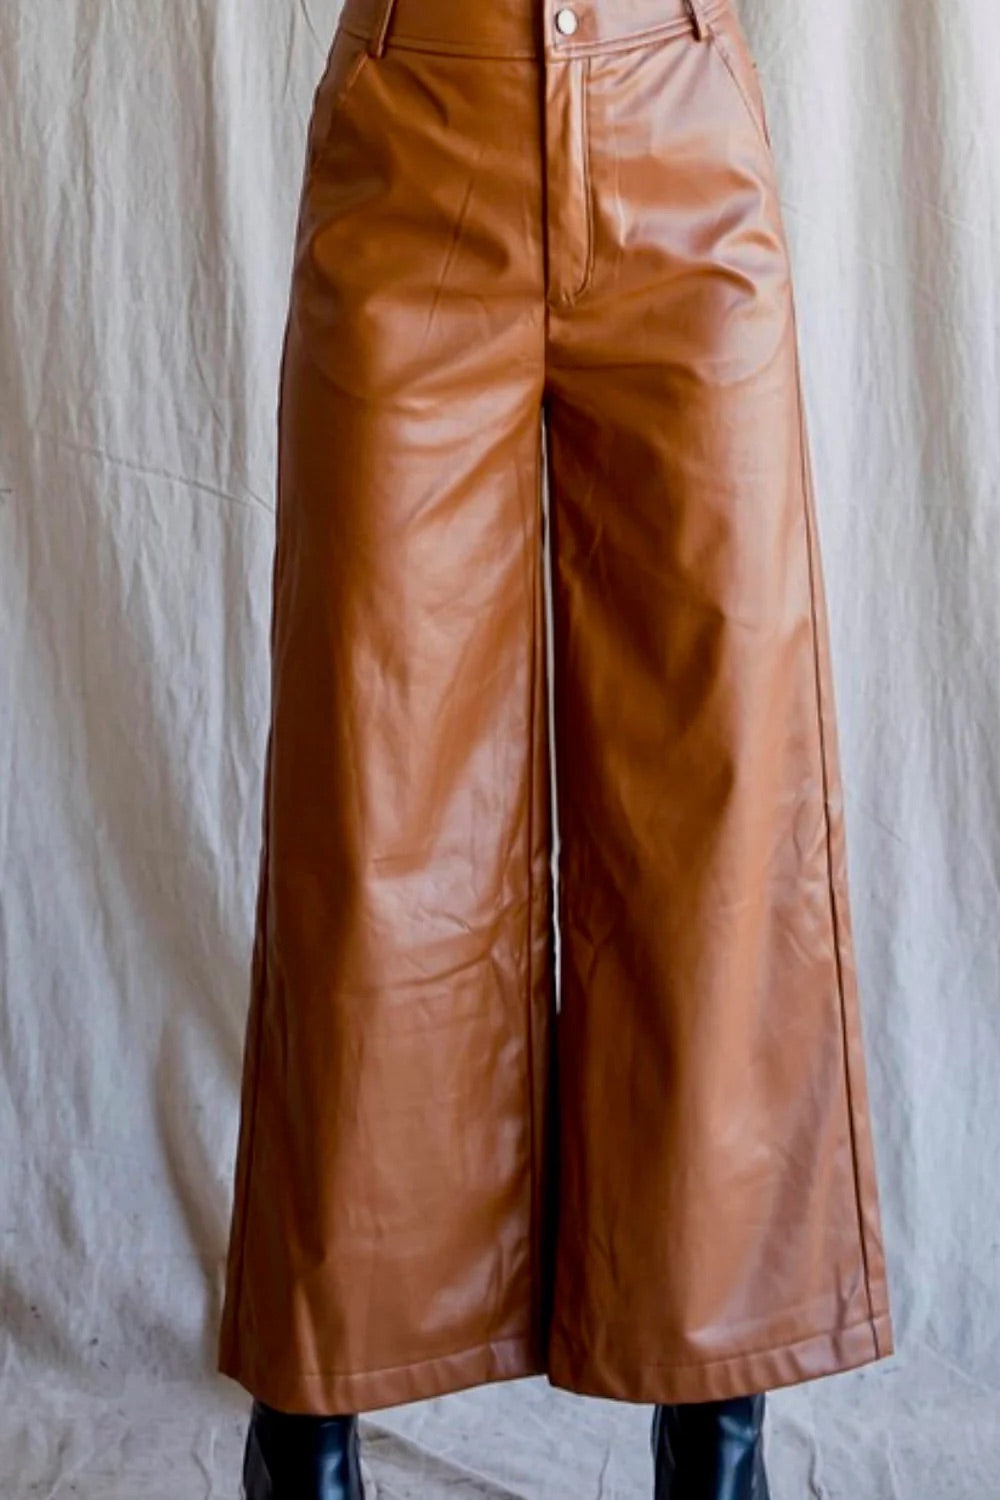 Faux leather brown wide leg pants with button zipper closure